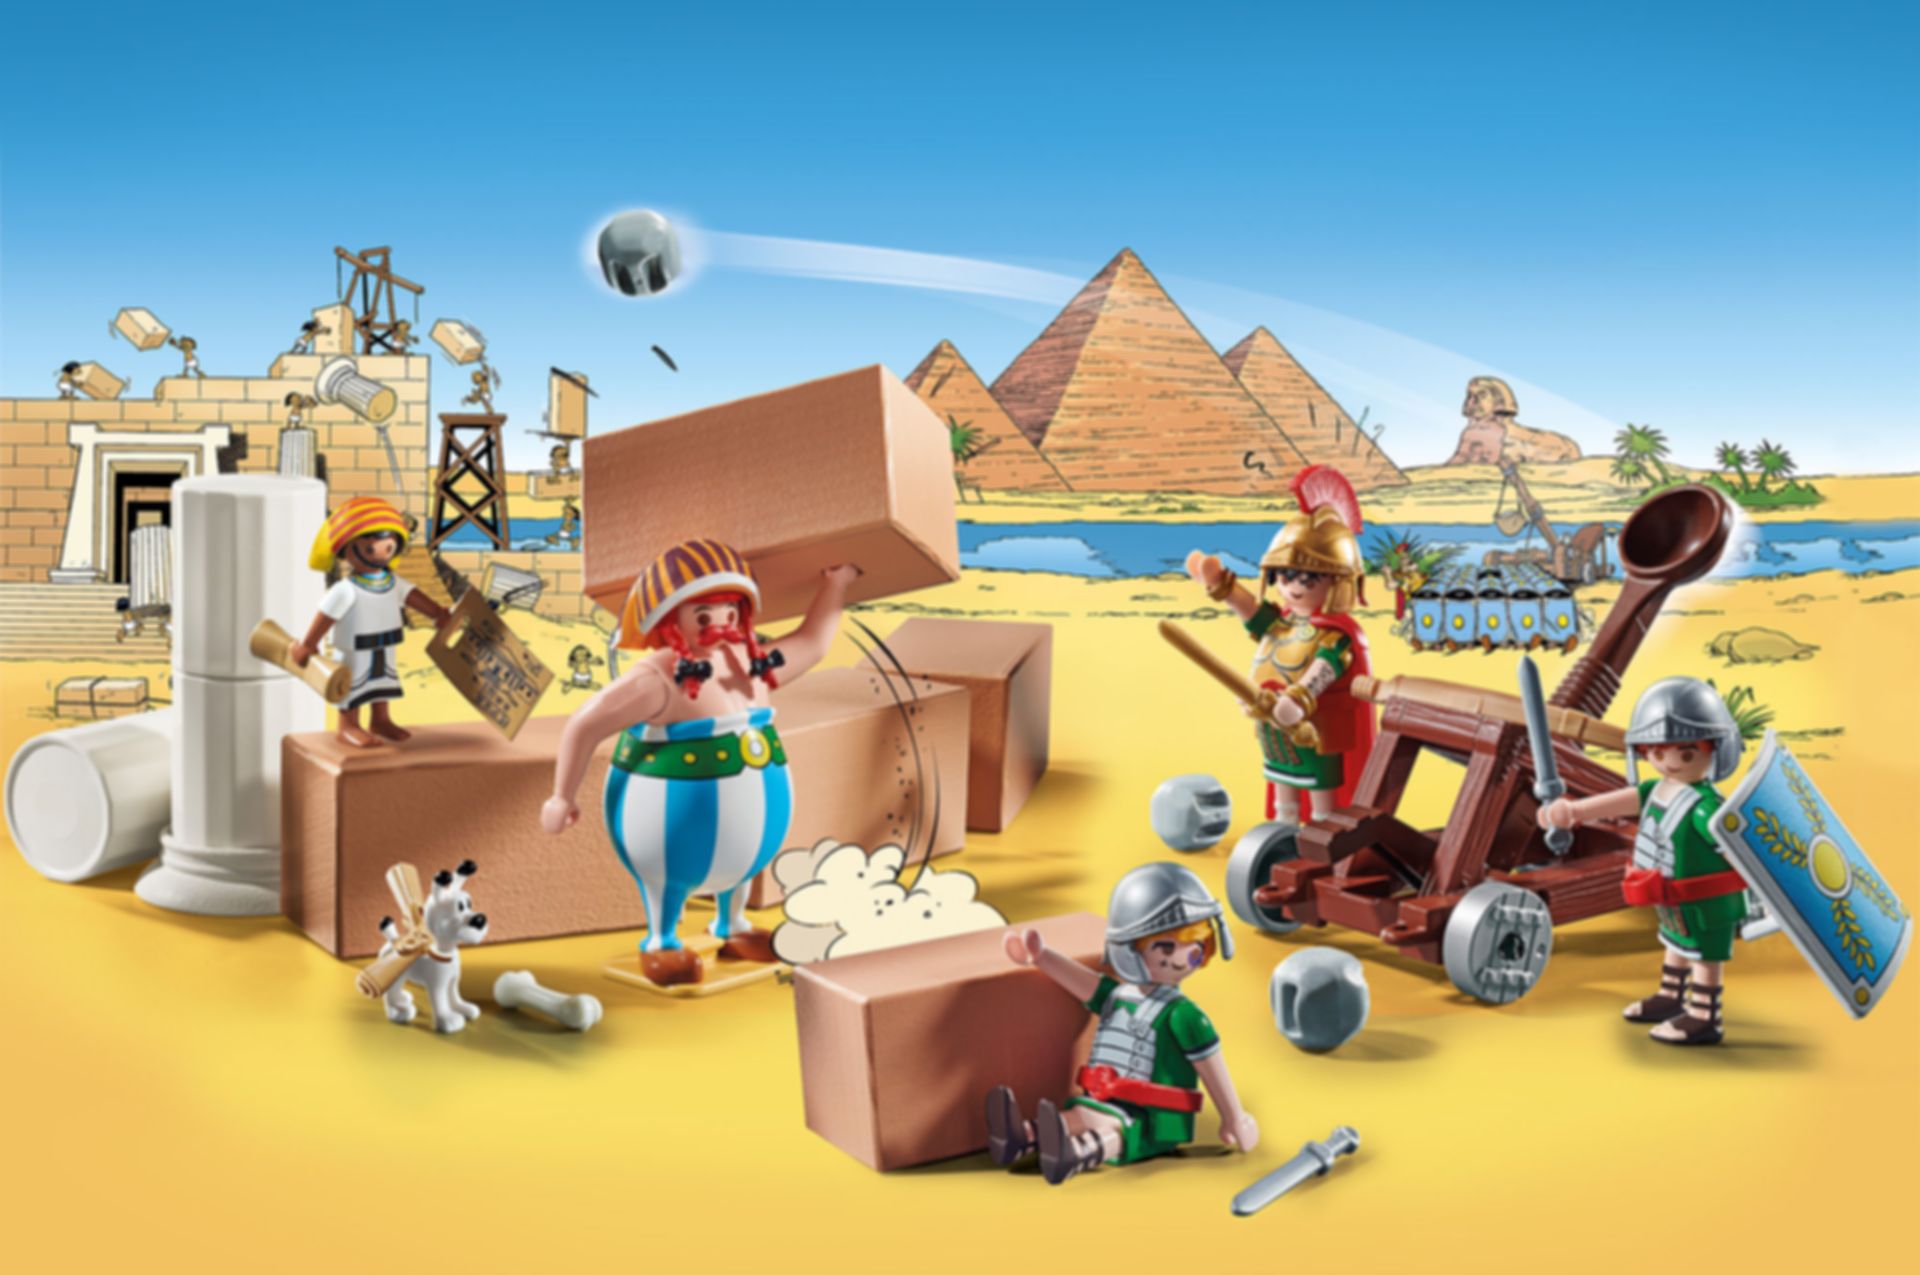 Playmobil® Asterix Asterix: Edifis and the Battle of the Palace